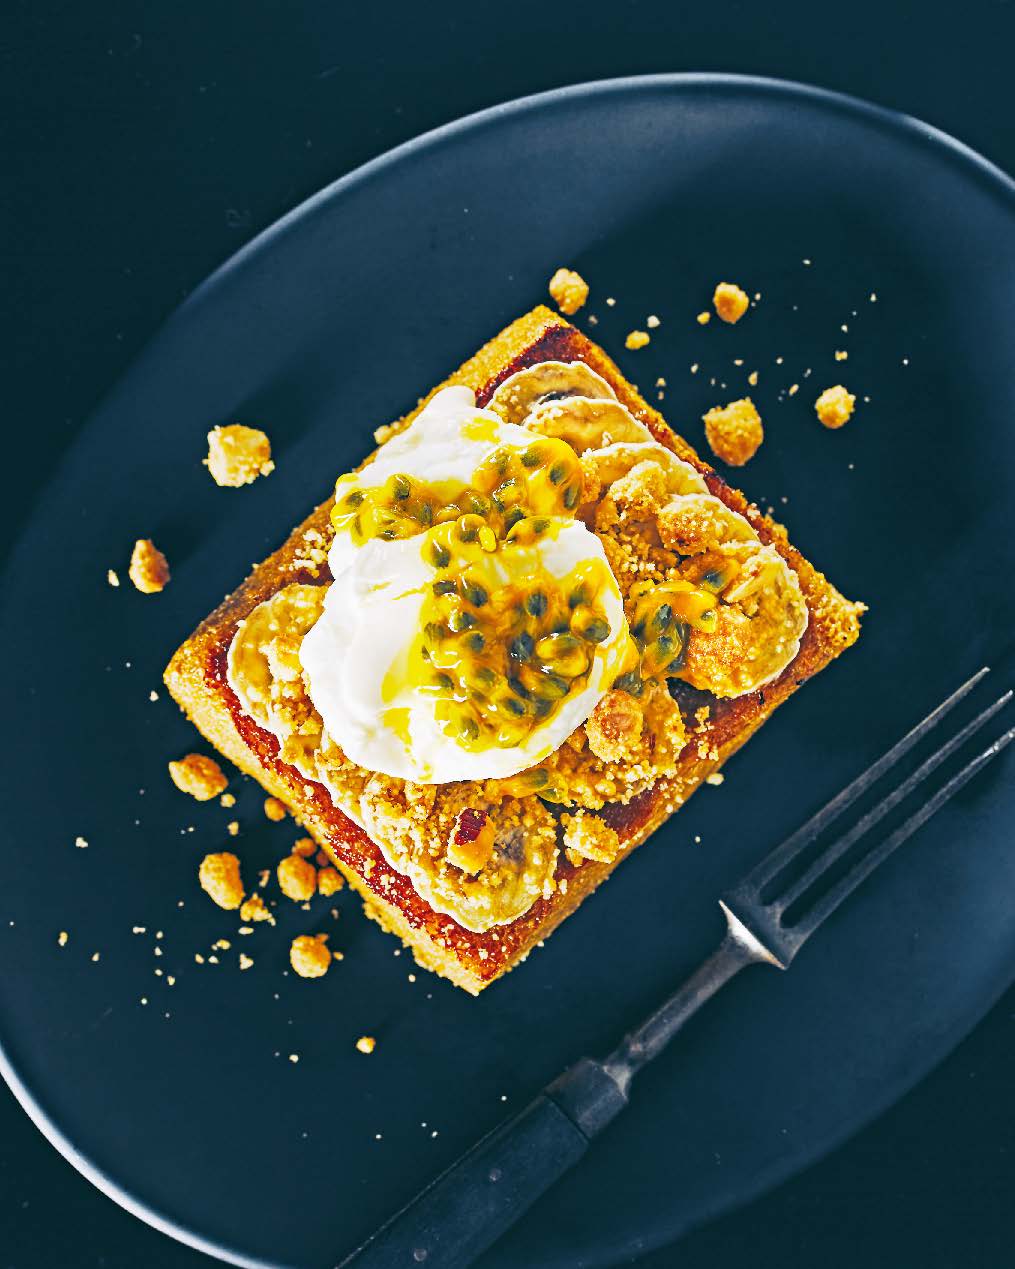 Coffee-infused French toast with banana, nut crumble + yoghurt